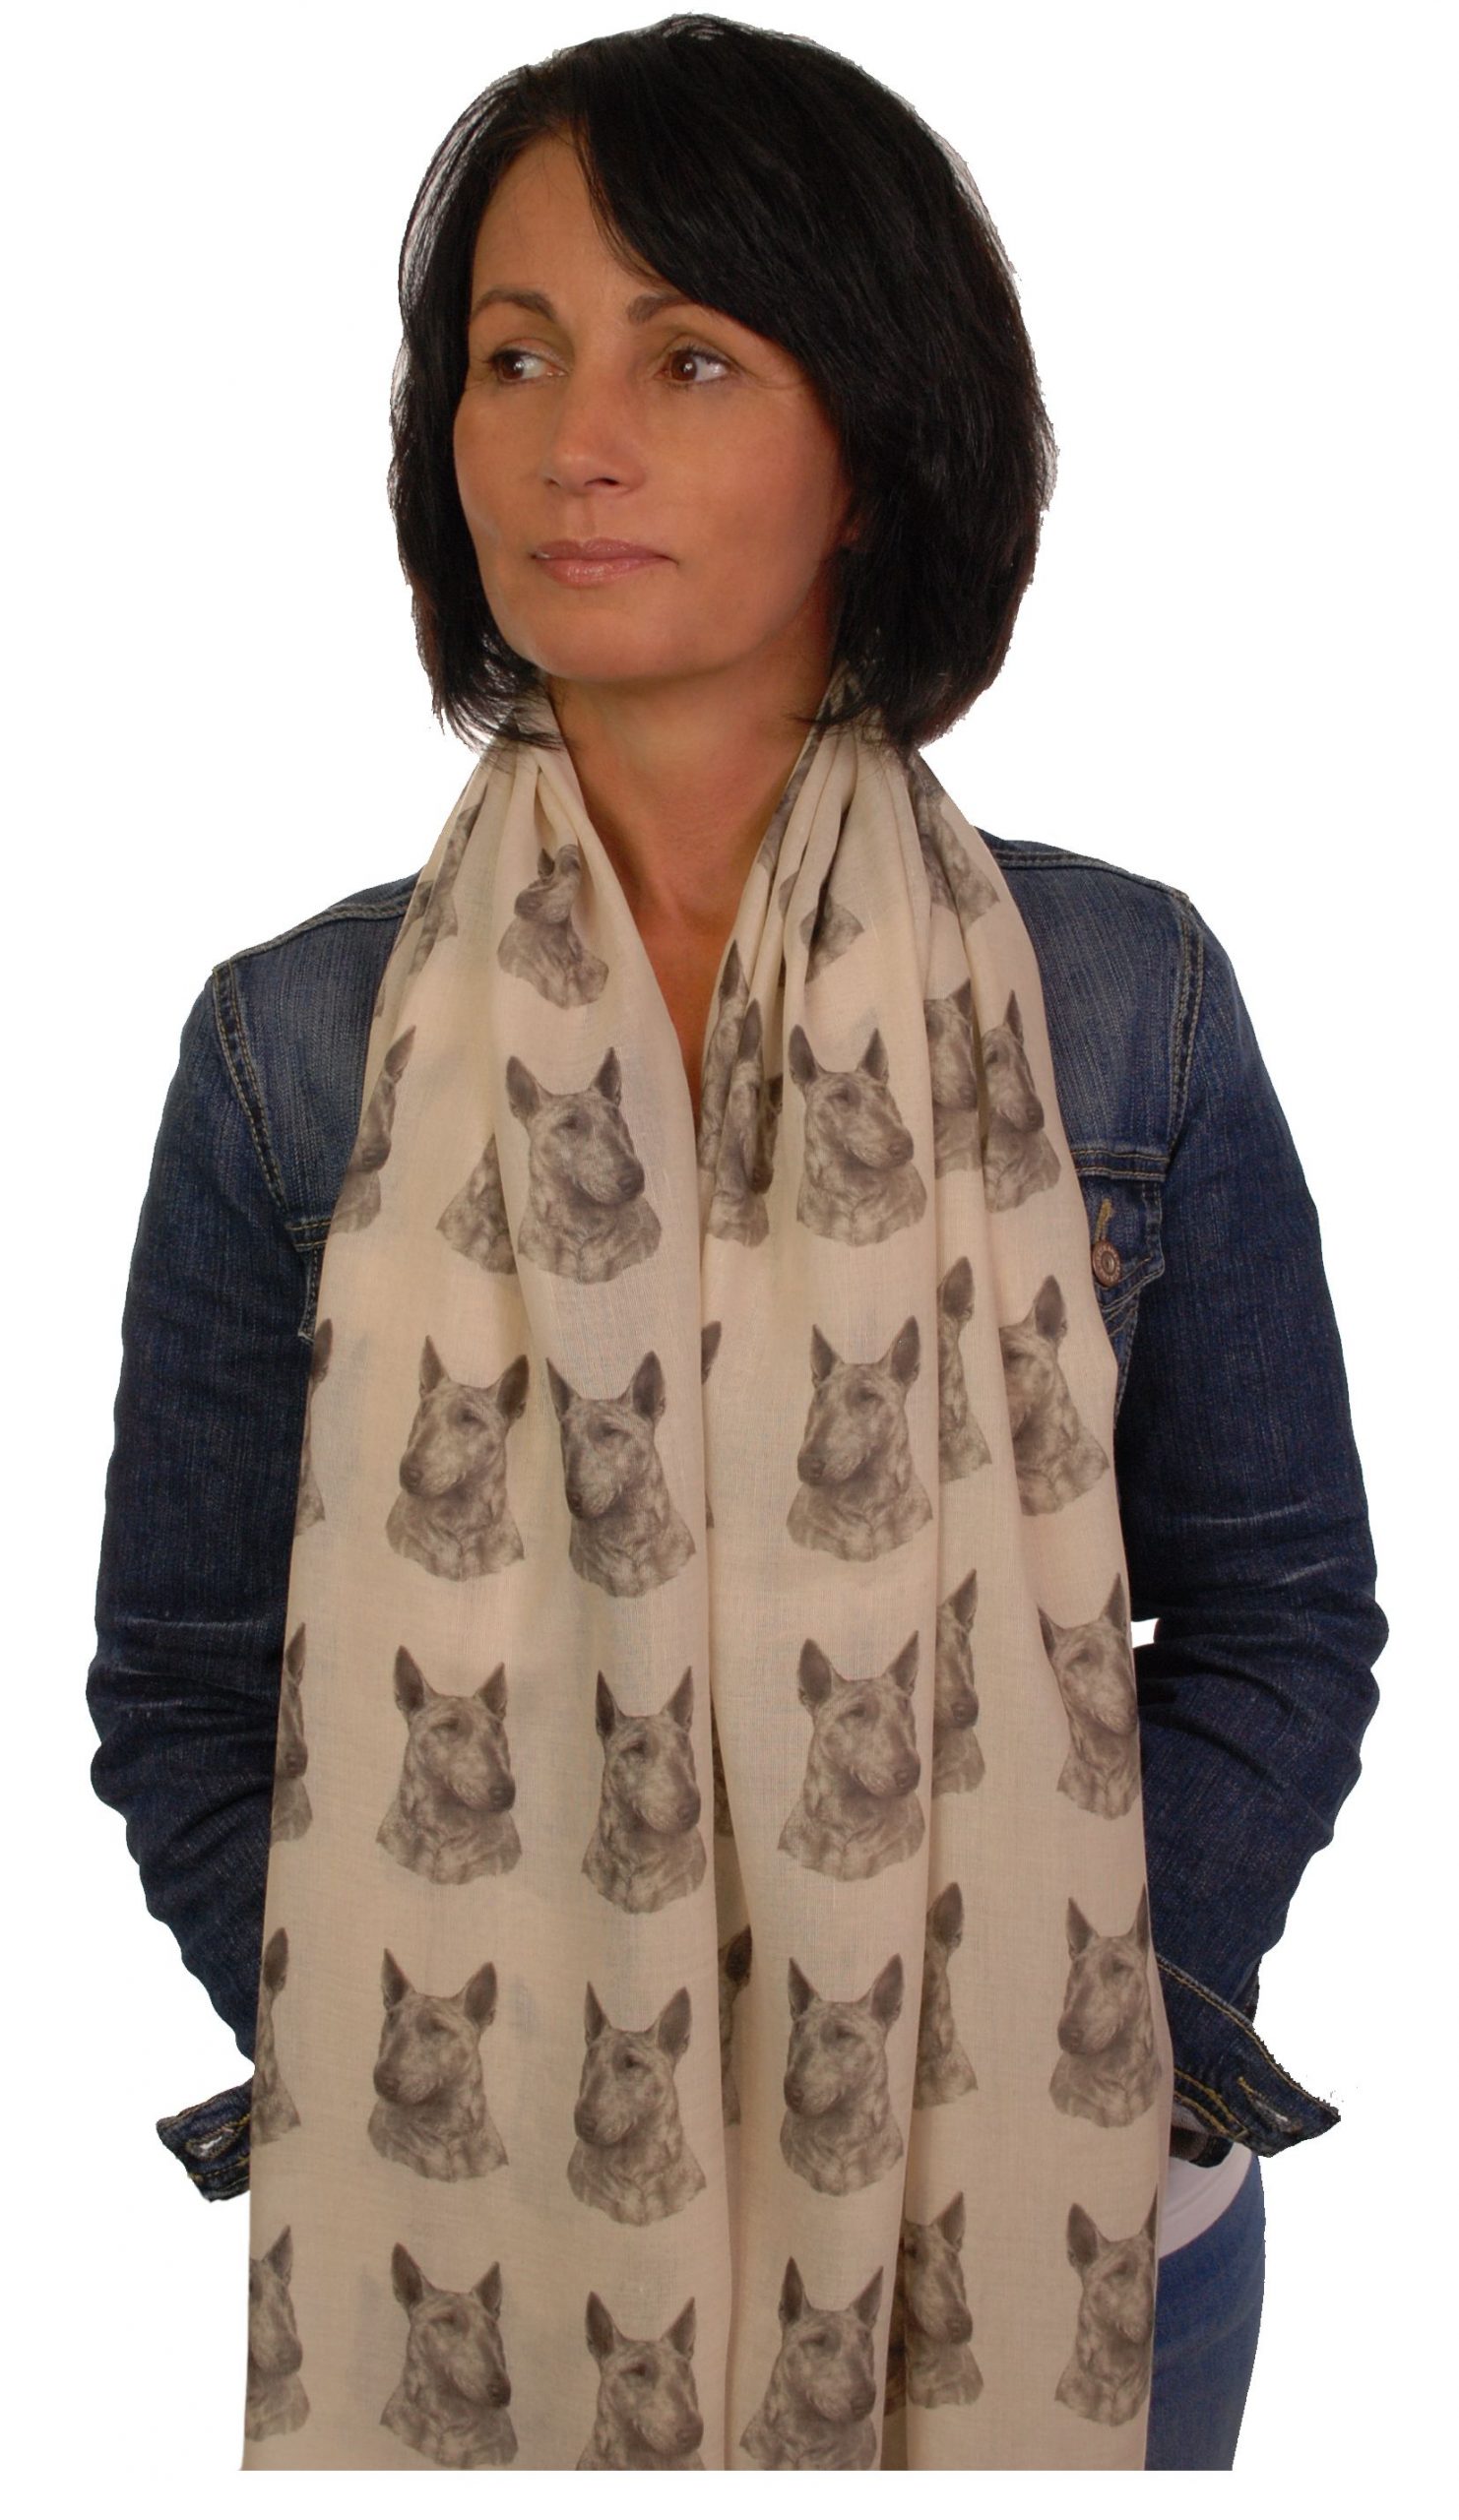 Mike Sibley Bull Terrier licensed design ladies fashion scarf